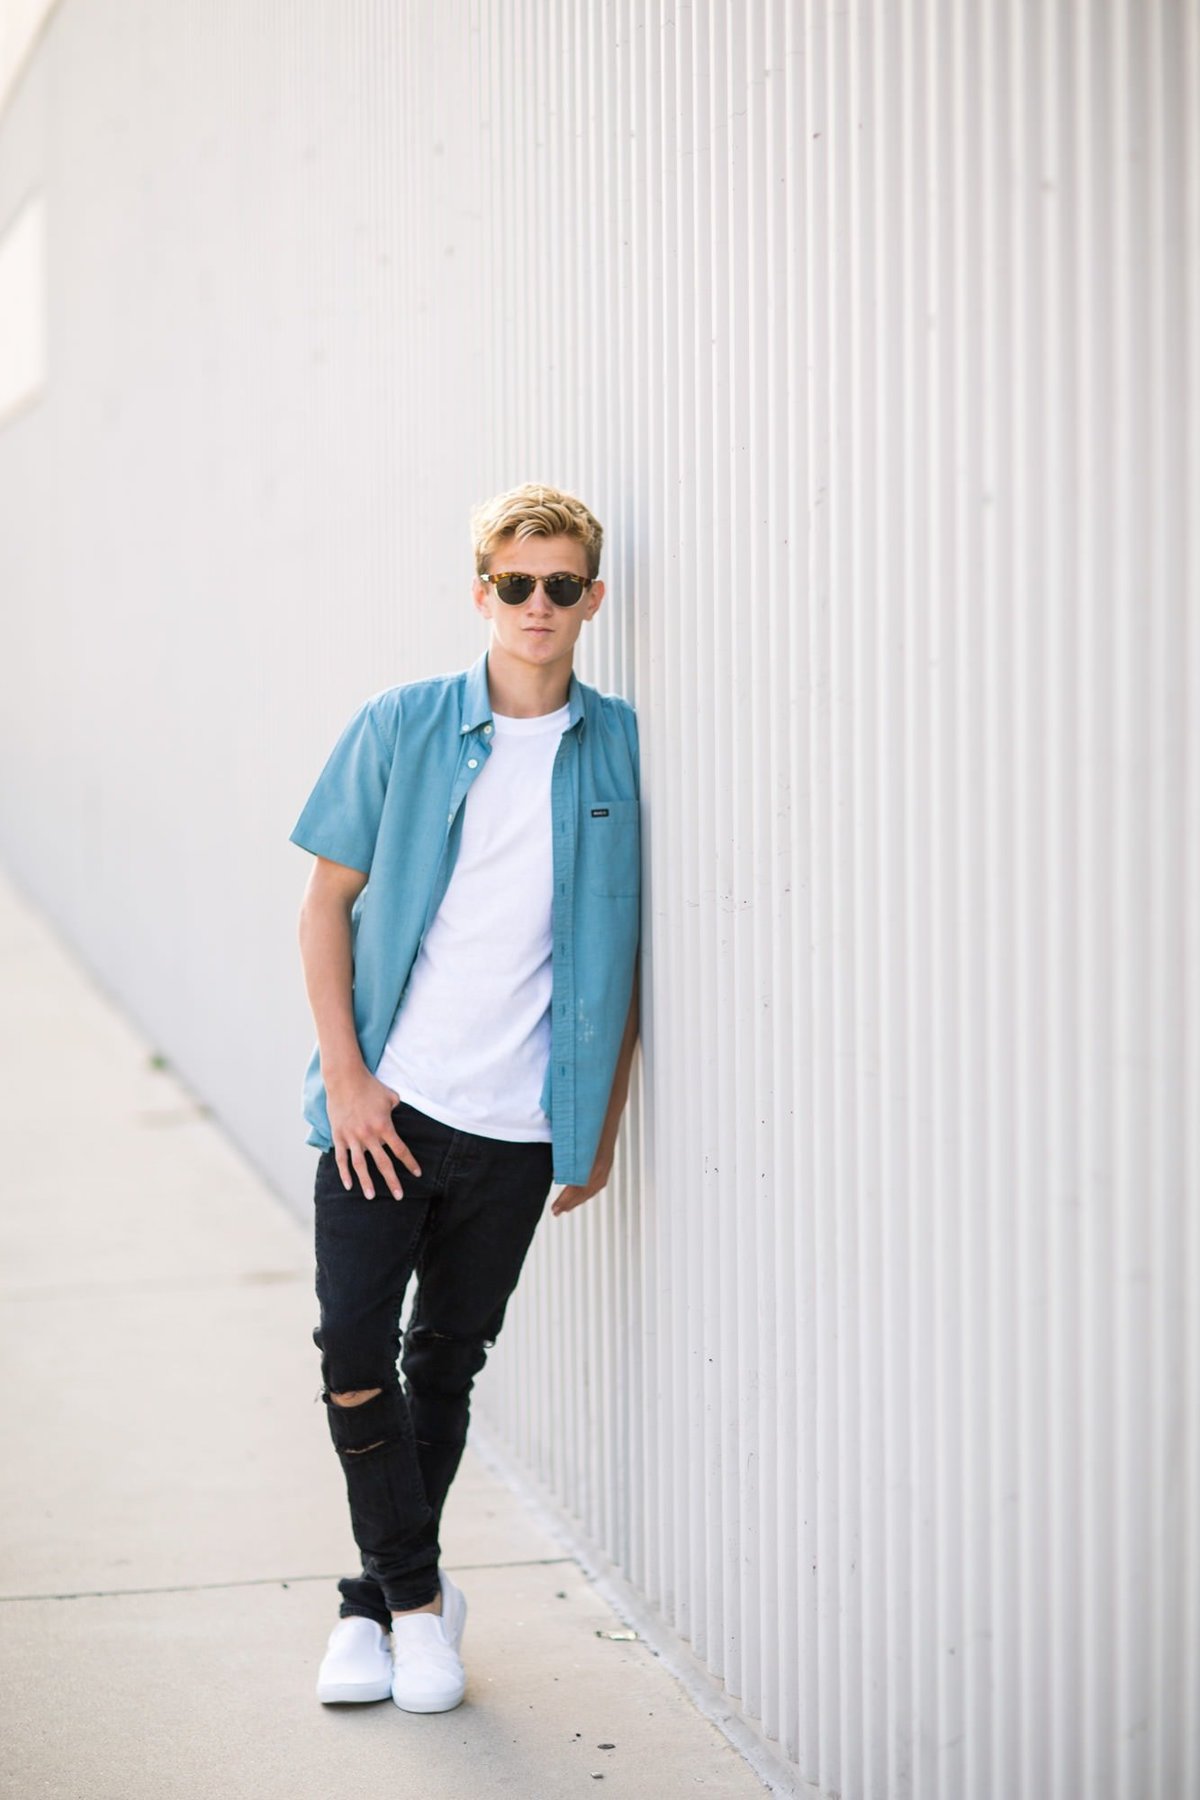 High school senior boy leans against a wall posing with his sunglasses on